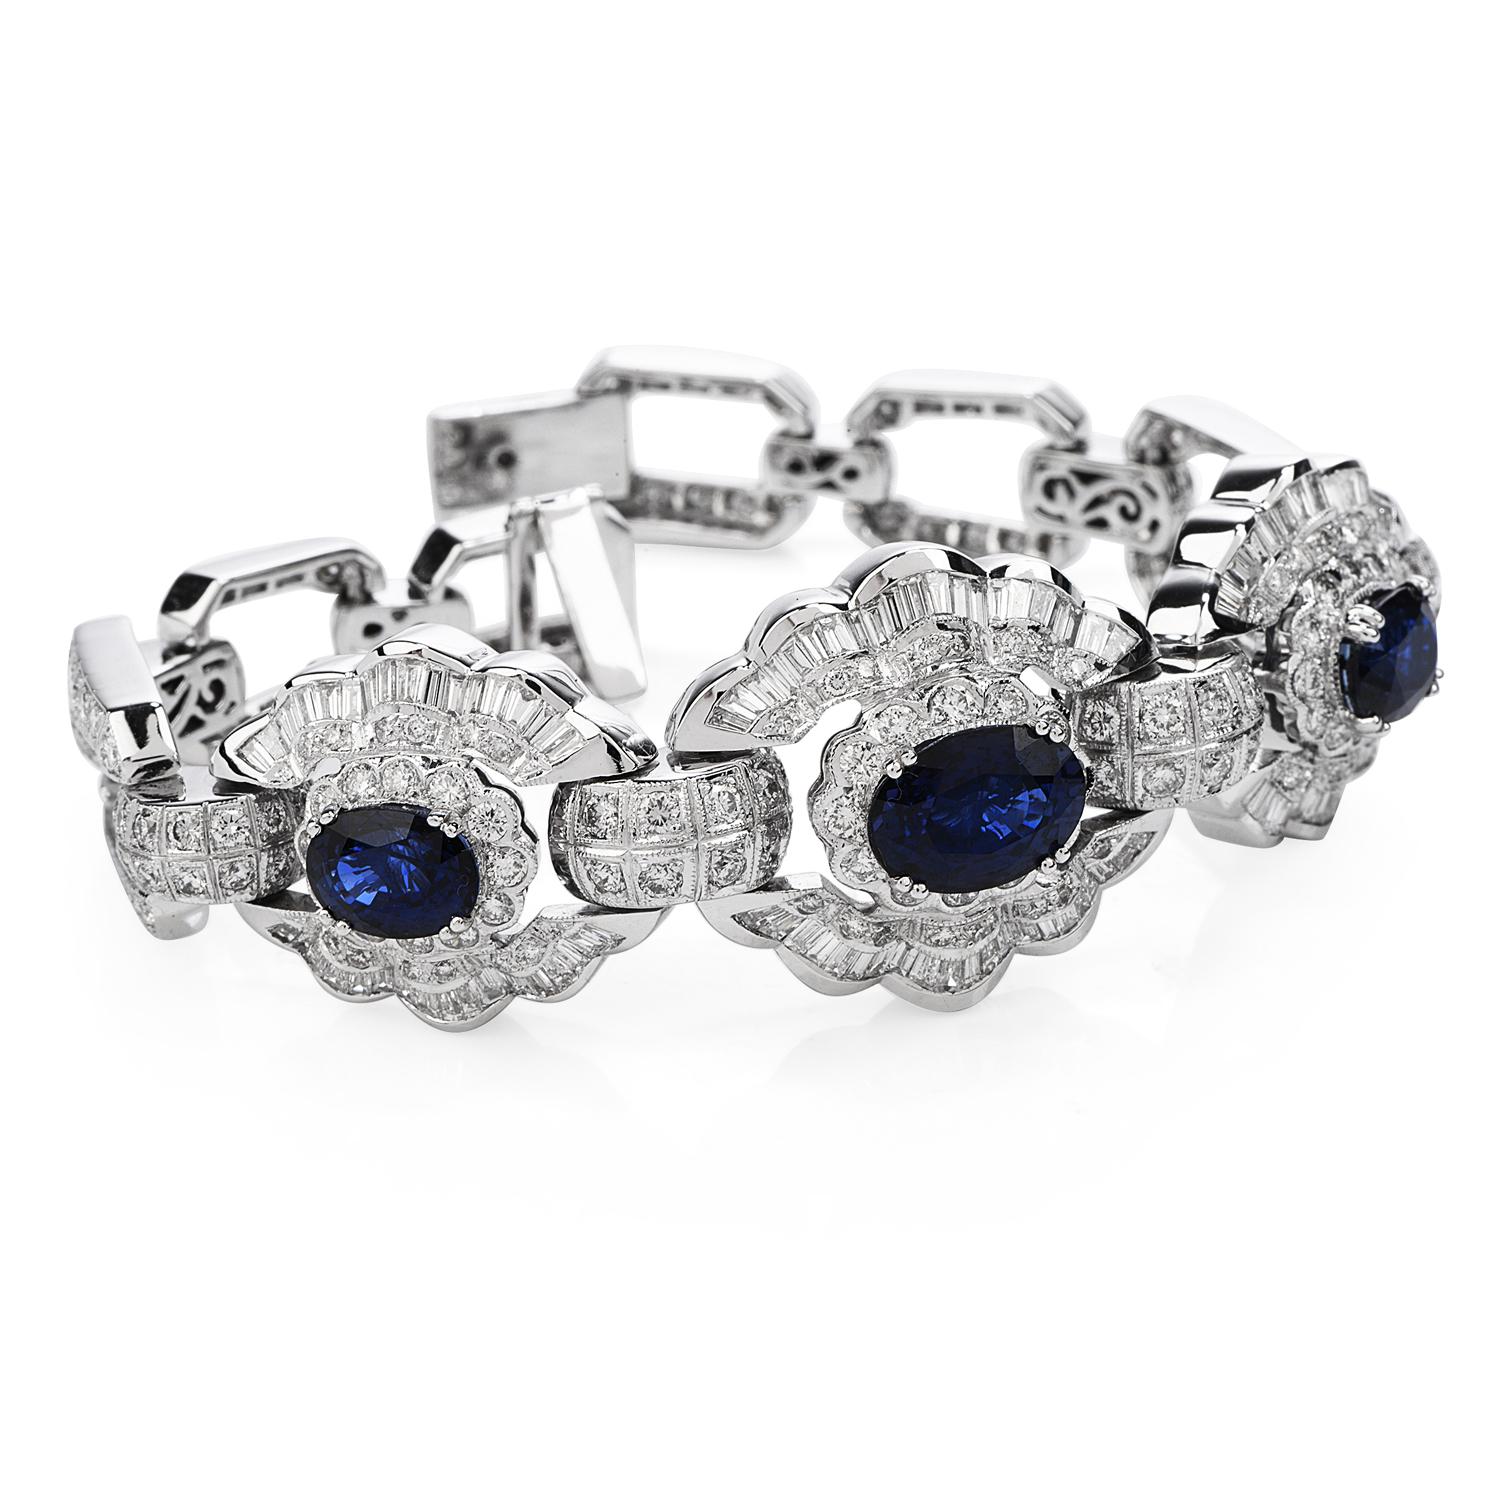 Your wrist will be astounding with this large Blue Sapphire & Diamond 18K White Gold Floral Design Bracelet. 

This bracelet has 3 Oval Cut Blue Sapphire with Prong set with approximately 8.16 Carats.

The bracelet is surrounded by approximately 258